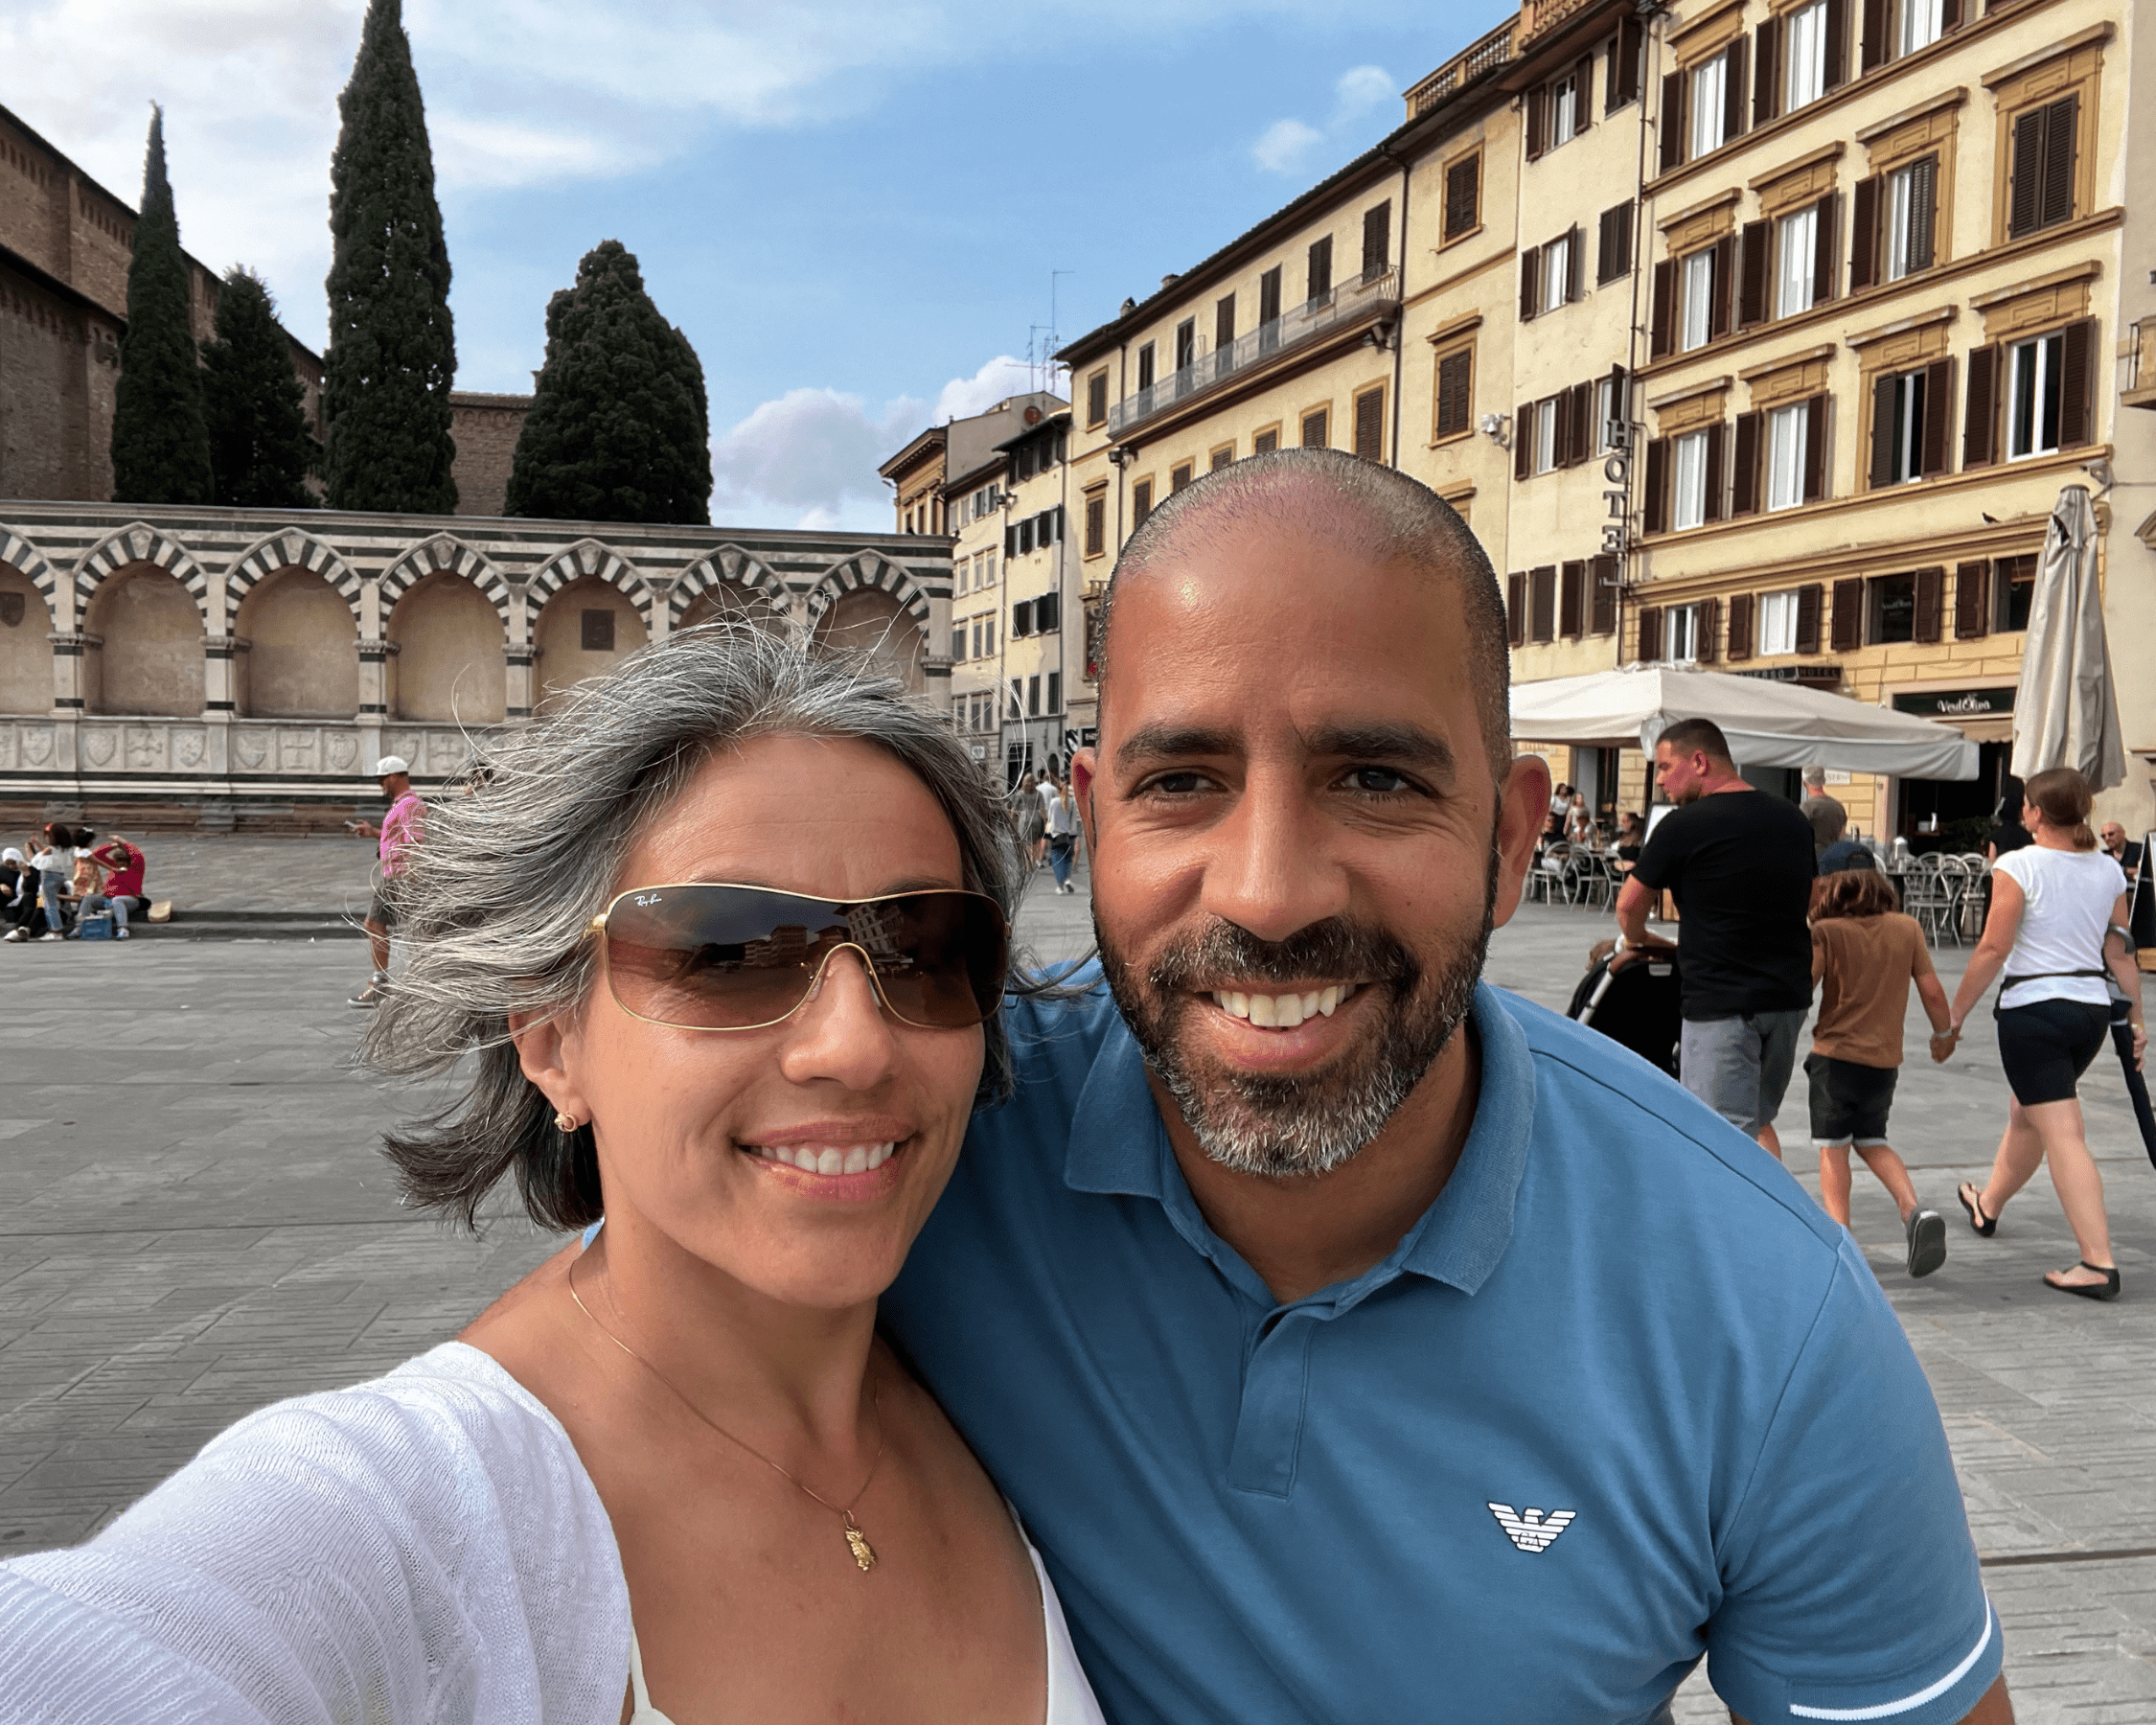 The Heart Of Italy: A Reminder to Slow Down & Enjoy Life